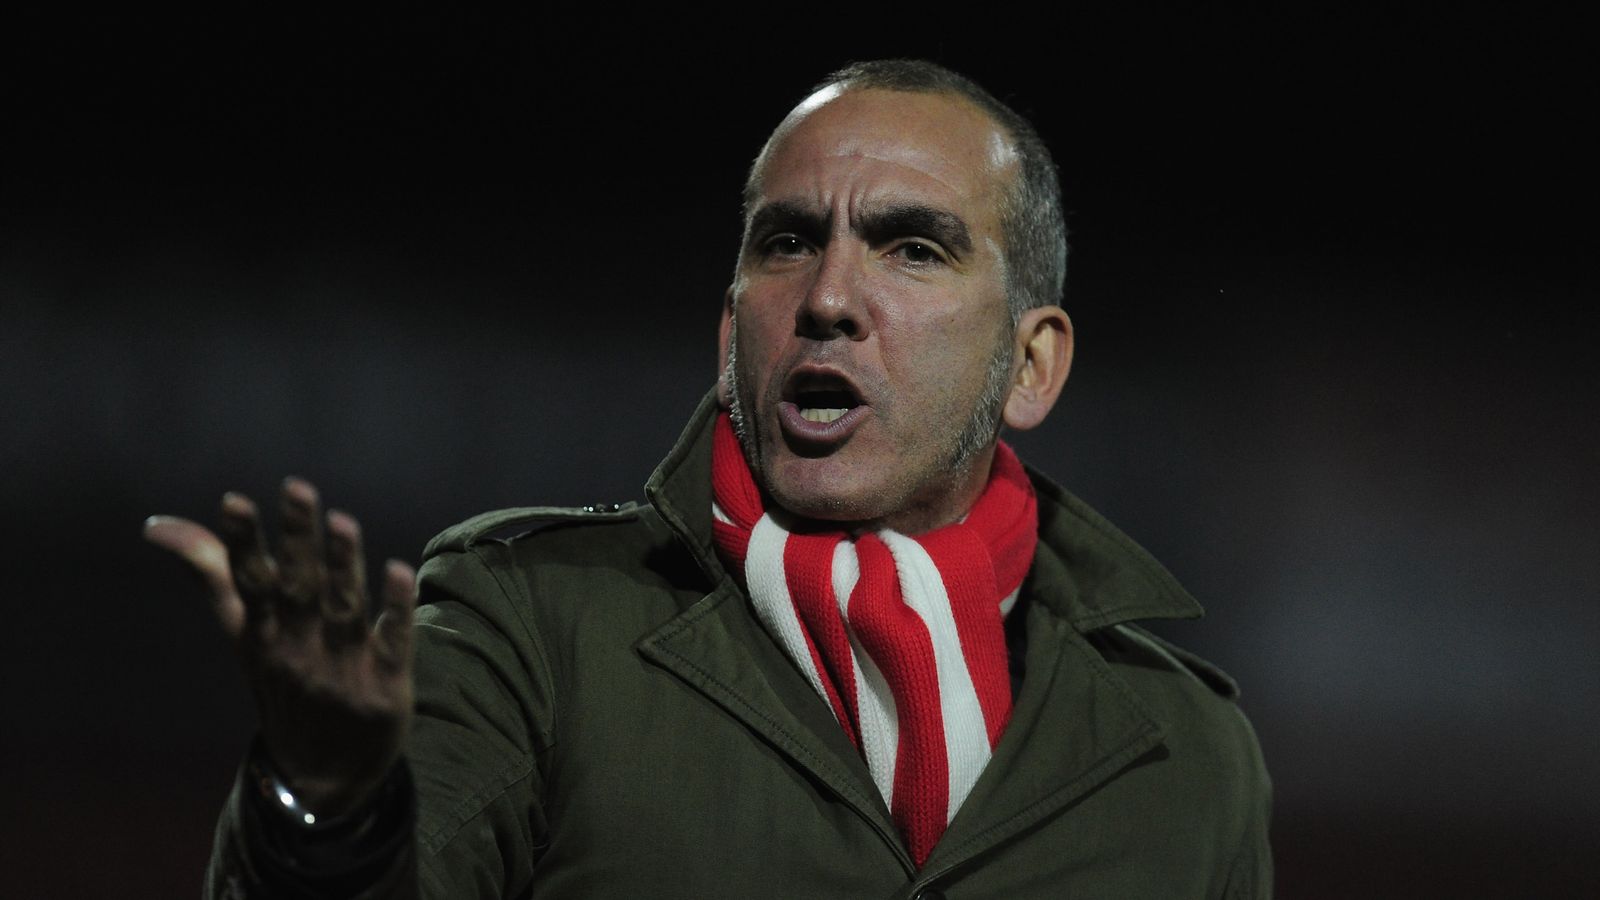 Paolo Di Canio in Sunderland for talks over vacant manager's role